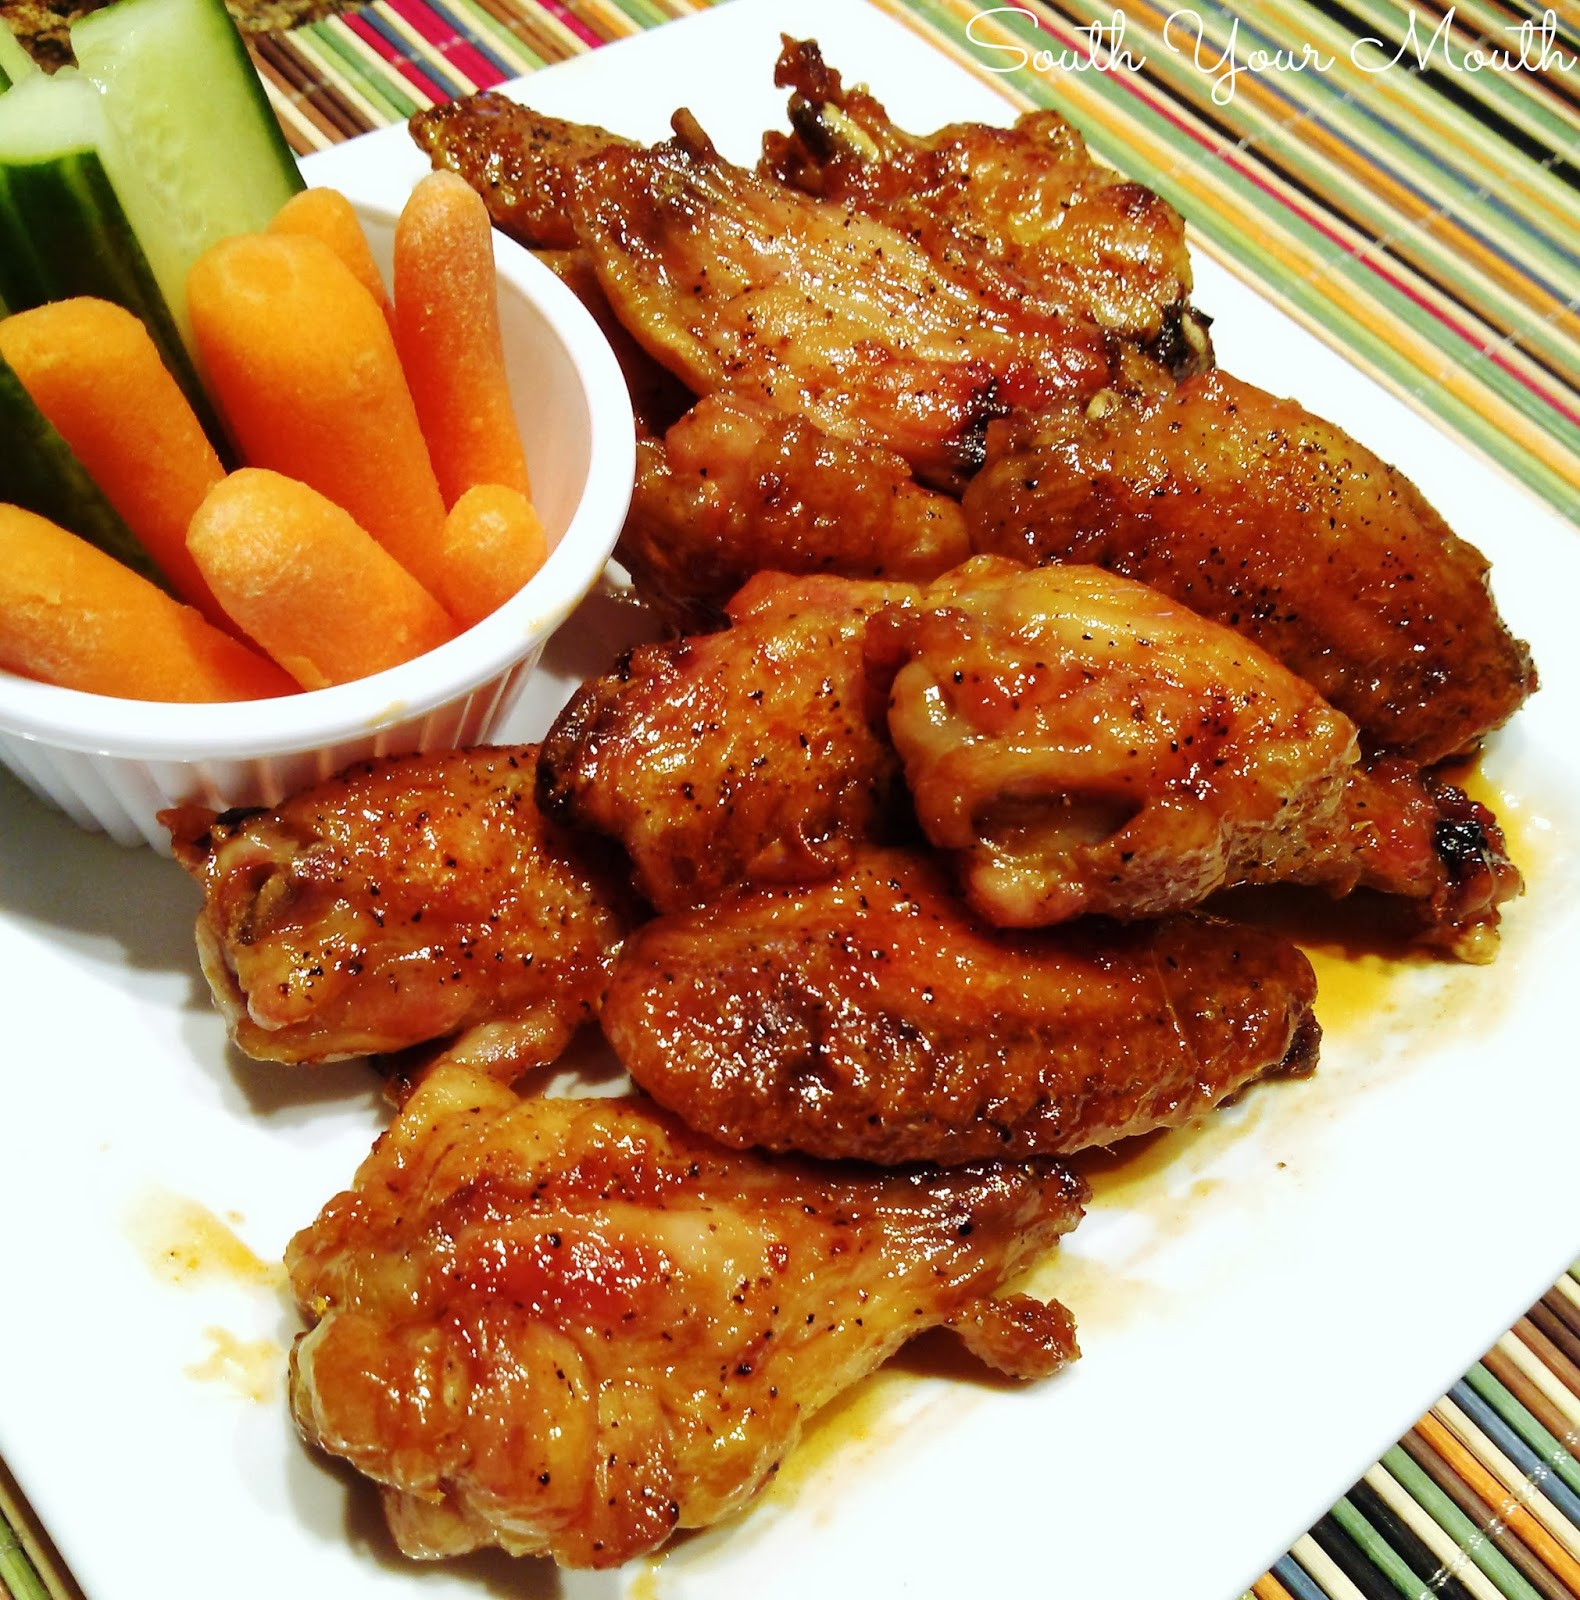 Baked Chicken Wings Crispy
 South Your Mouth Crispy Baked Chicken Wings with Sweet